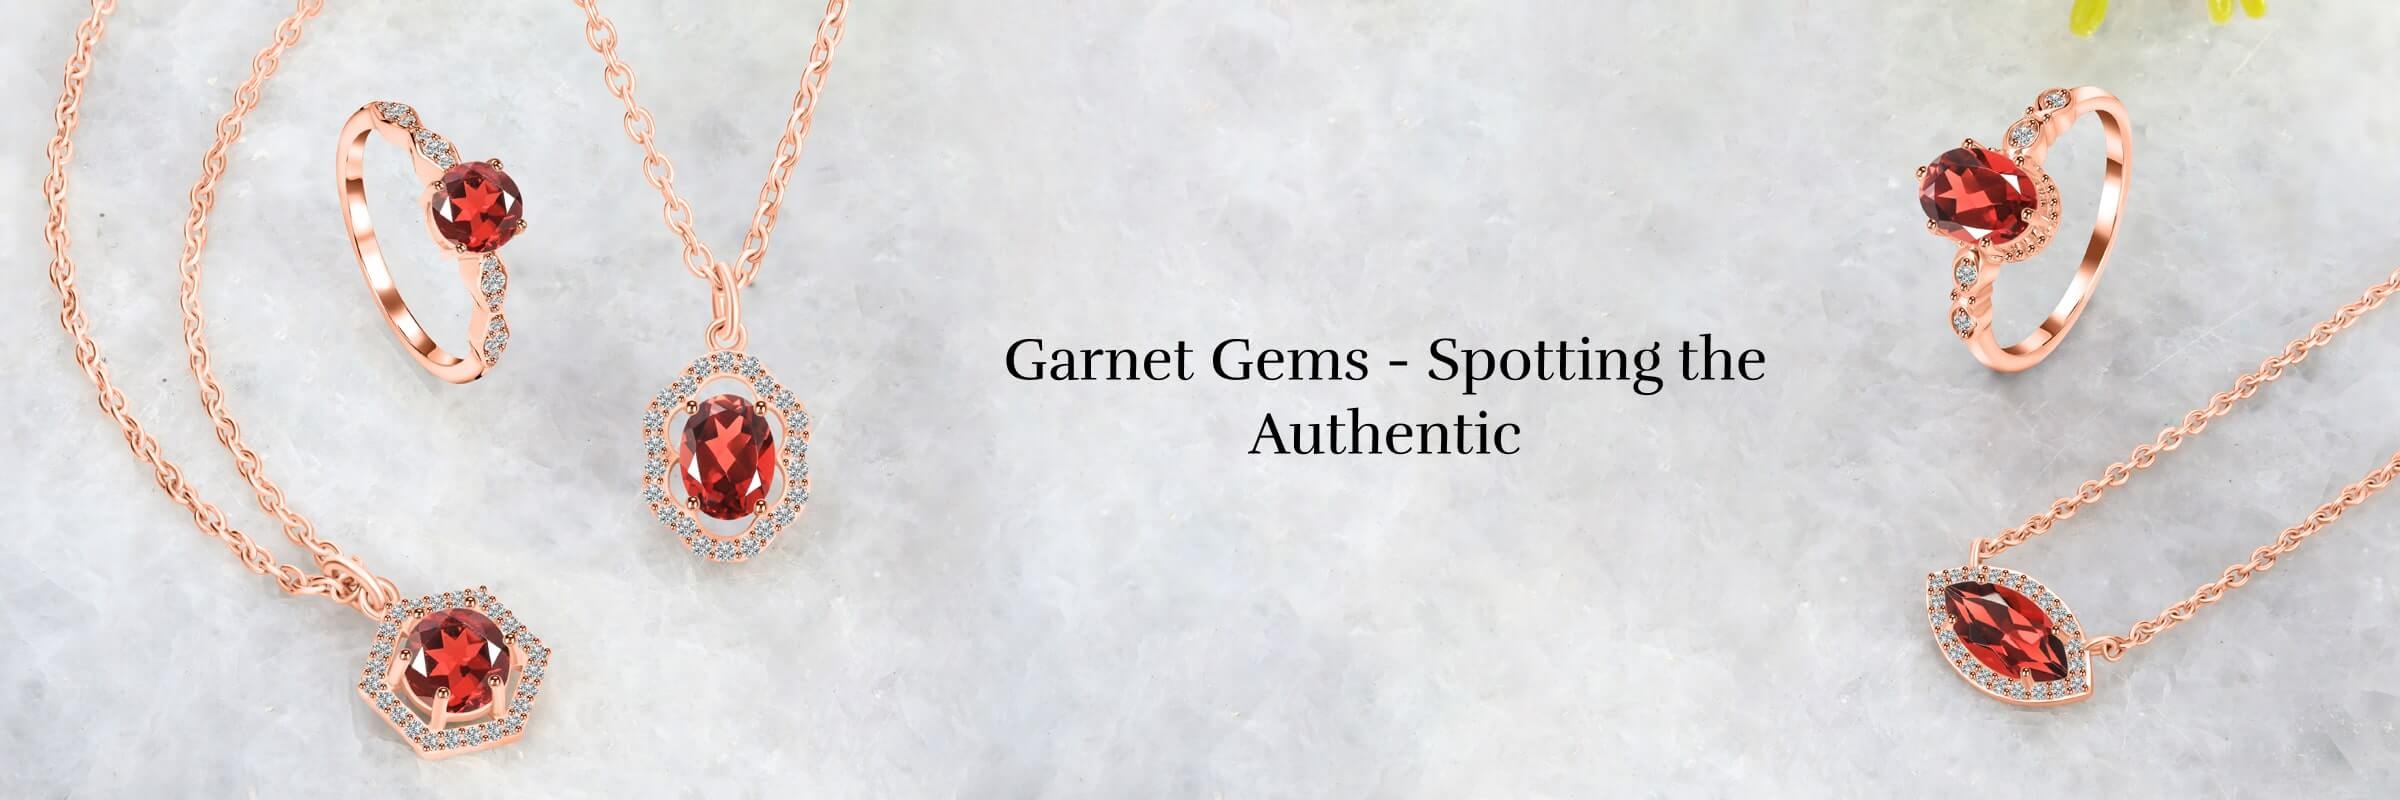 How to Identify If Garnet Gemstone Is Real or Fake